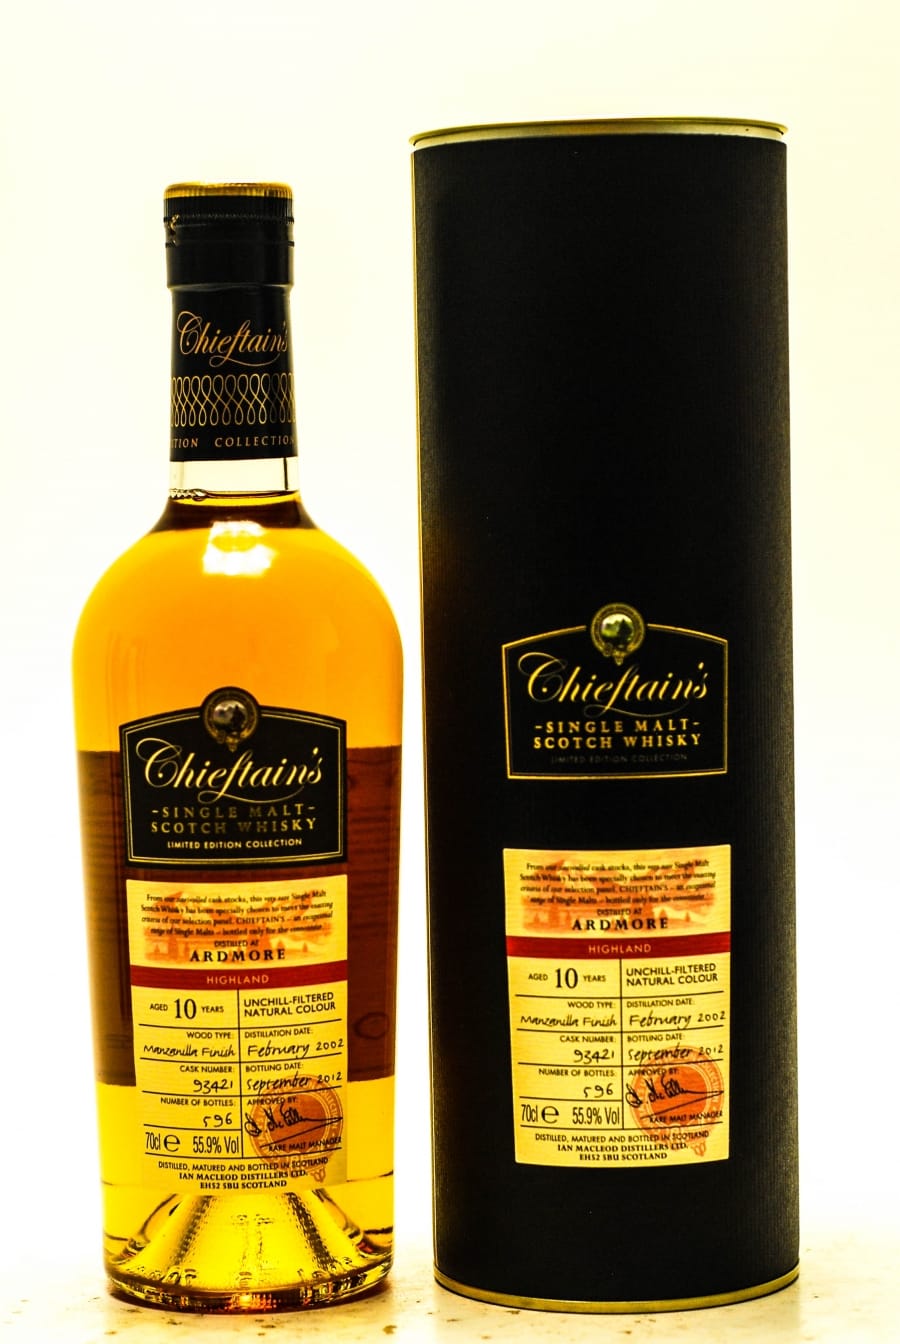 Ardmore - Ardmore 16 YO Chieftains Manzanilla Finish Cask: 93421 Distilled: 02.2002 Bottled: 09.2012 1 Of 596 Bottles 55.9% 2002 Perfect